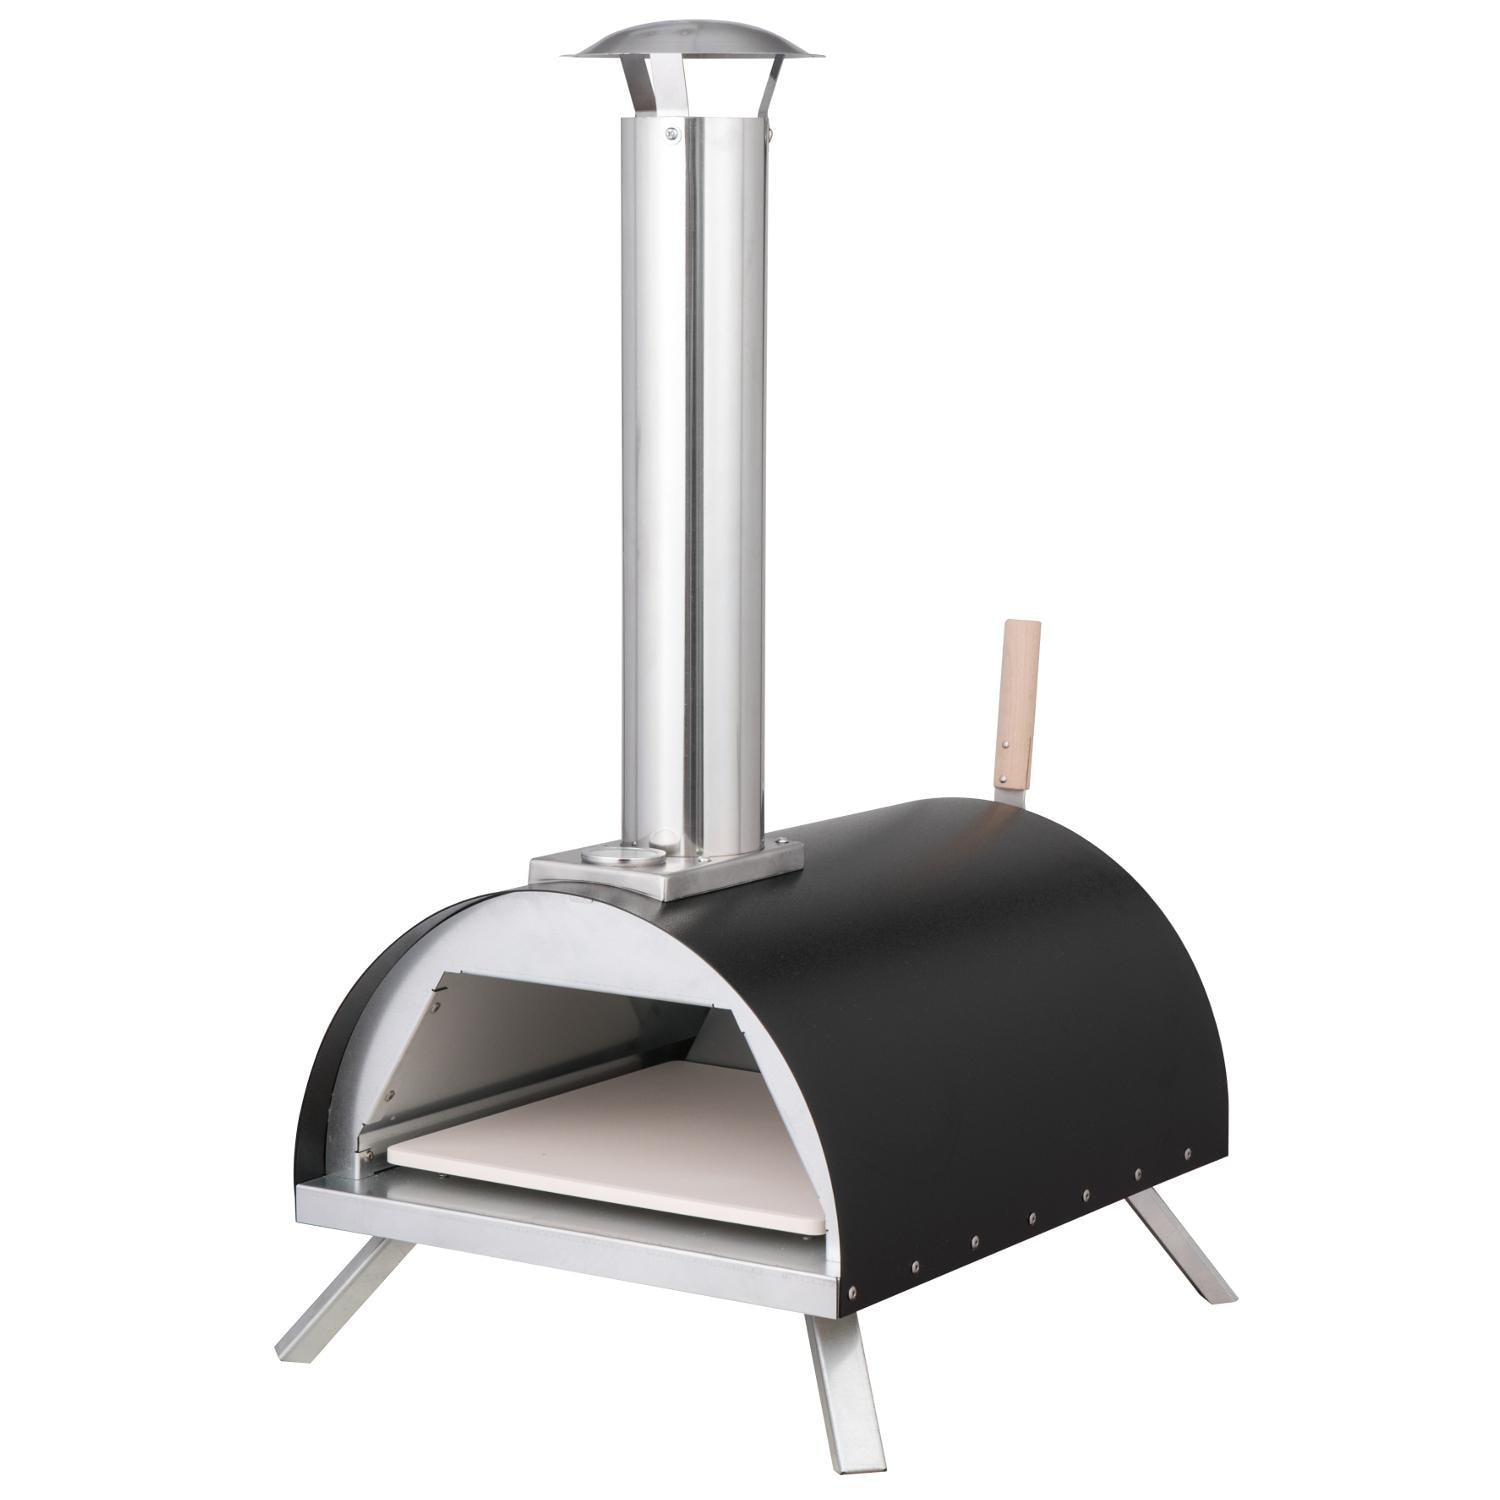 WPPO WKE-01-BLK Le Peppe Portable Wood Fired Pizza Oven, Black - image 1 of 2